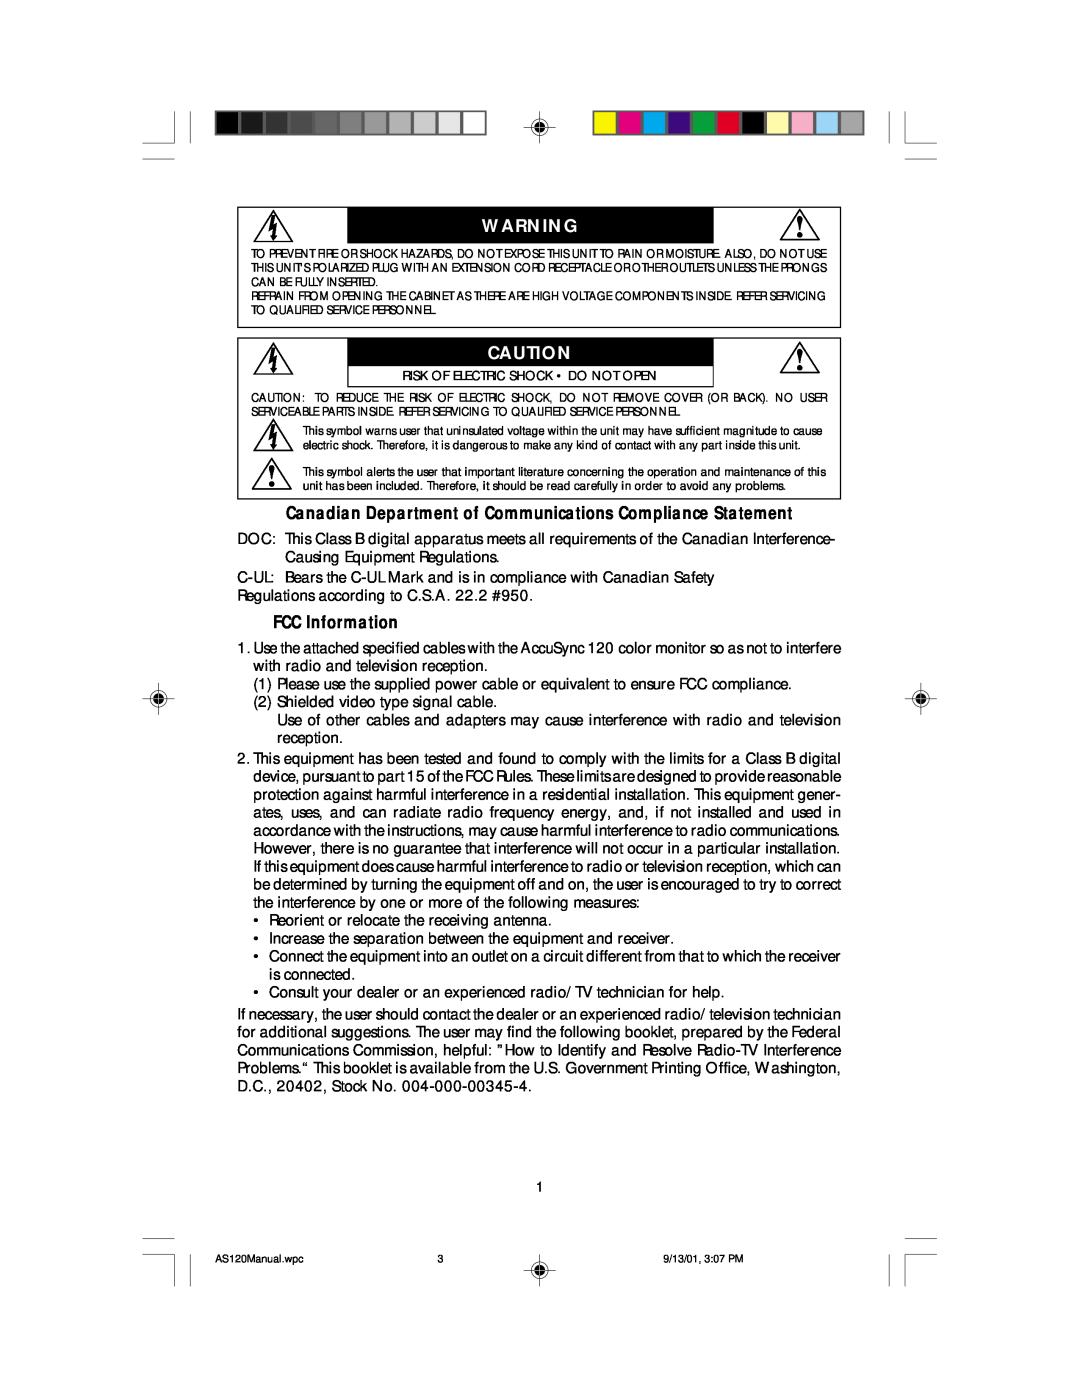 NEC AccuSync 120 user manual Canadian Department of Communications Compliance Statement, FCC Information 